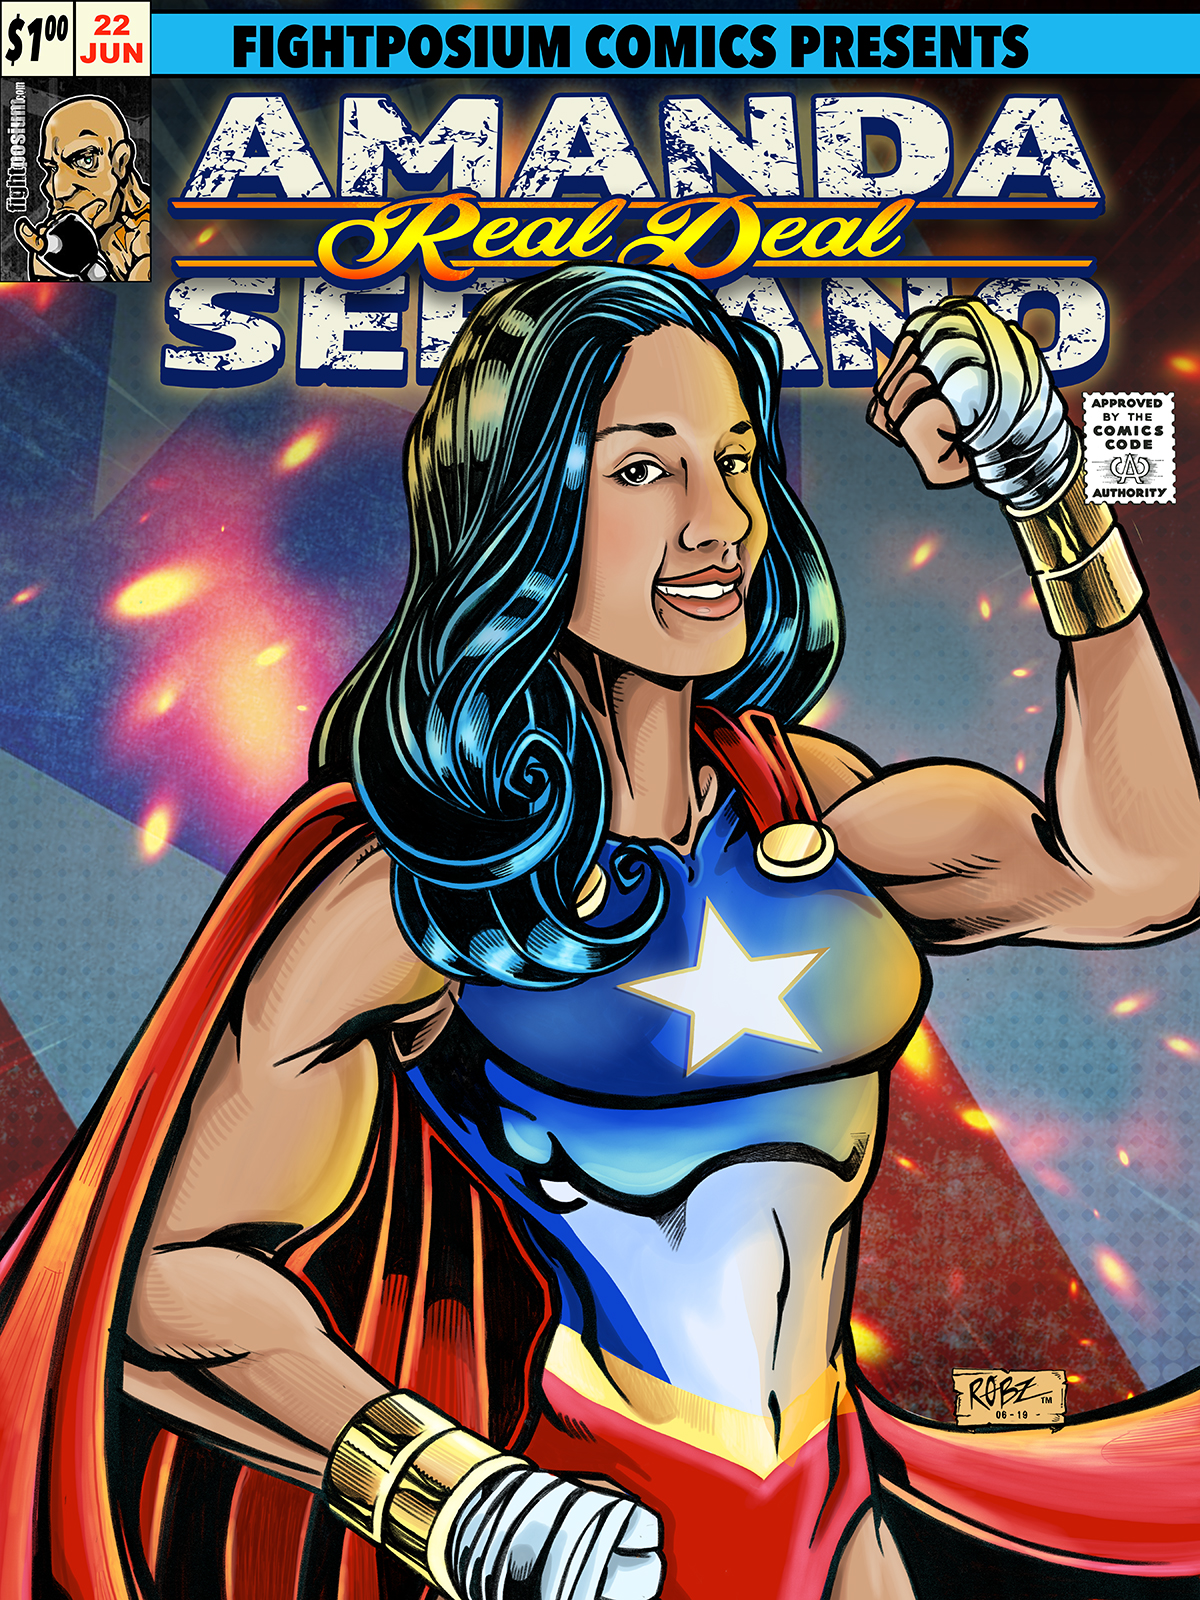 My Comic book cover of the Great Amanda Serrano "The Real Deal"! BJJ, MMA and Boxing...this Superwoman can do it all!